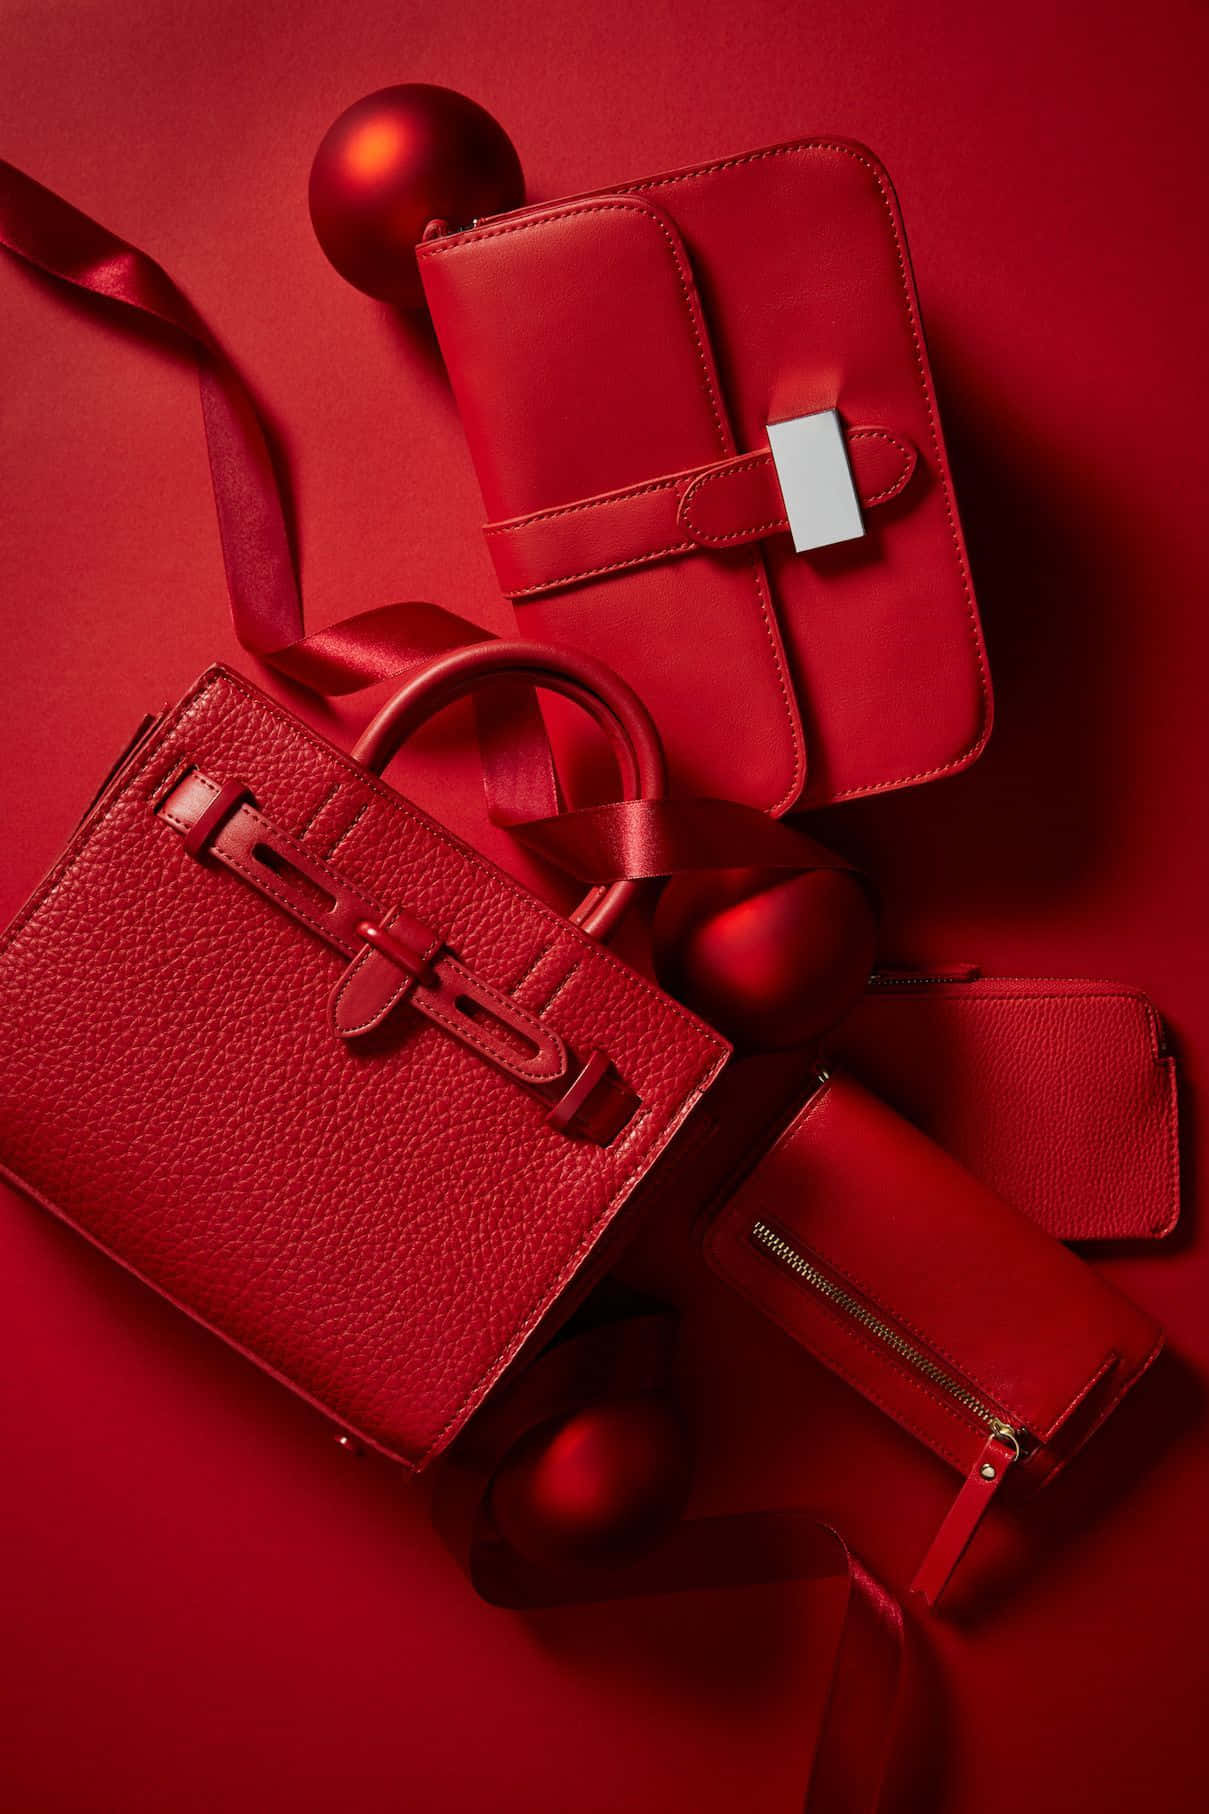 Stylish Red Handbag for Every Occasion Wallpaper